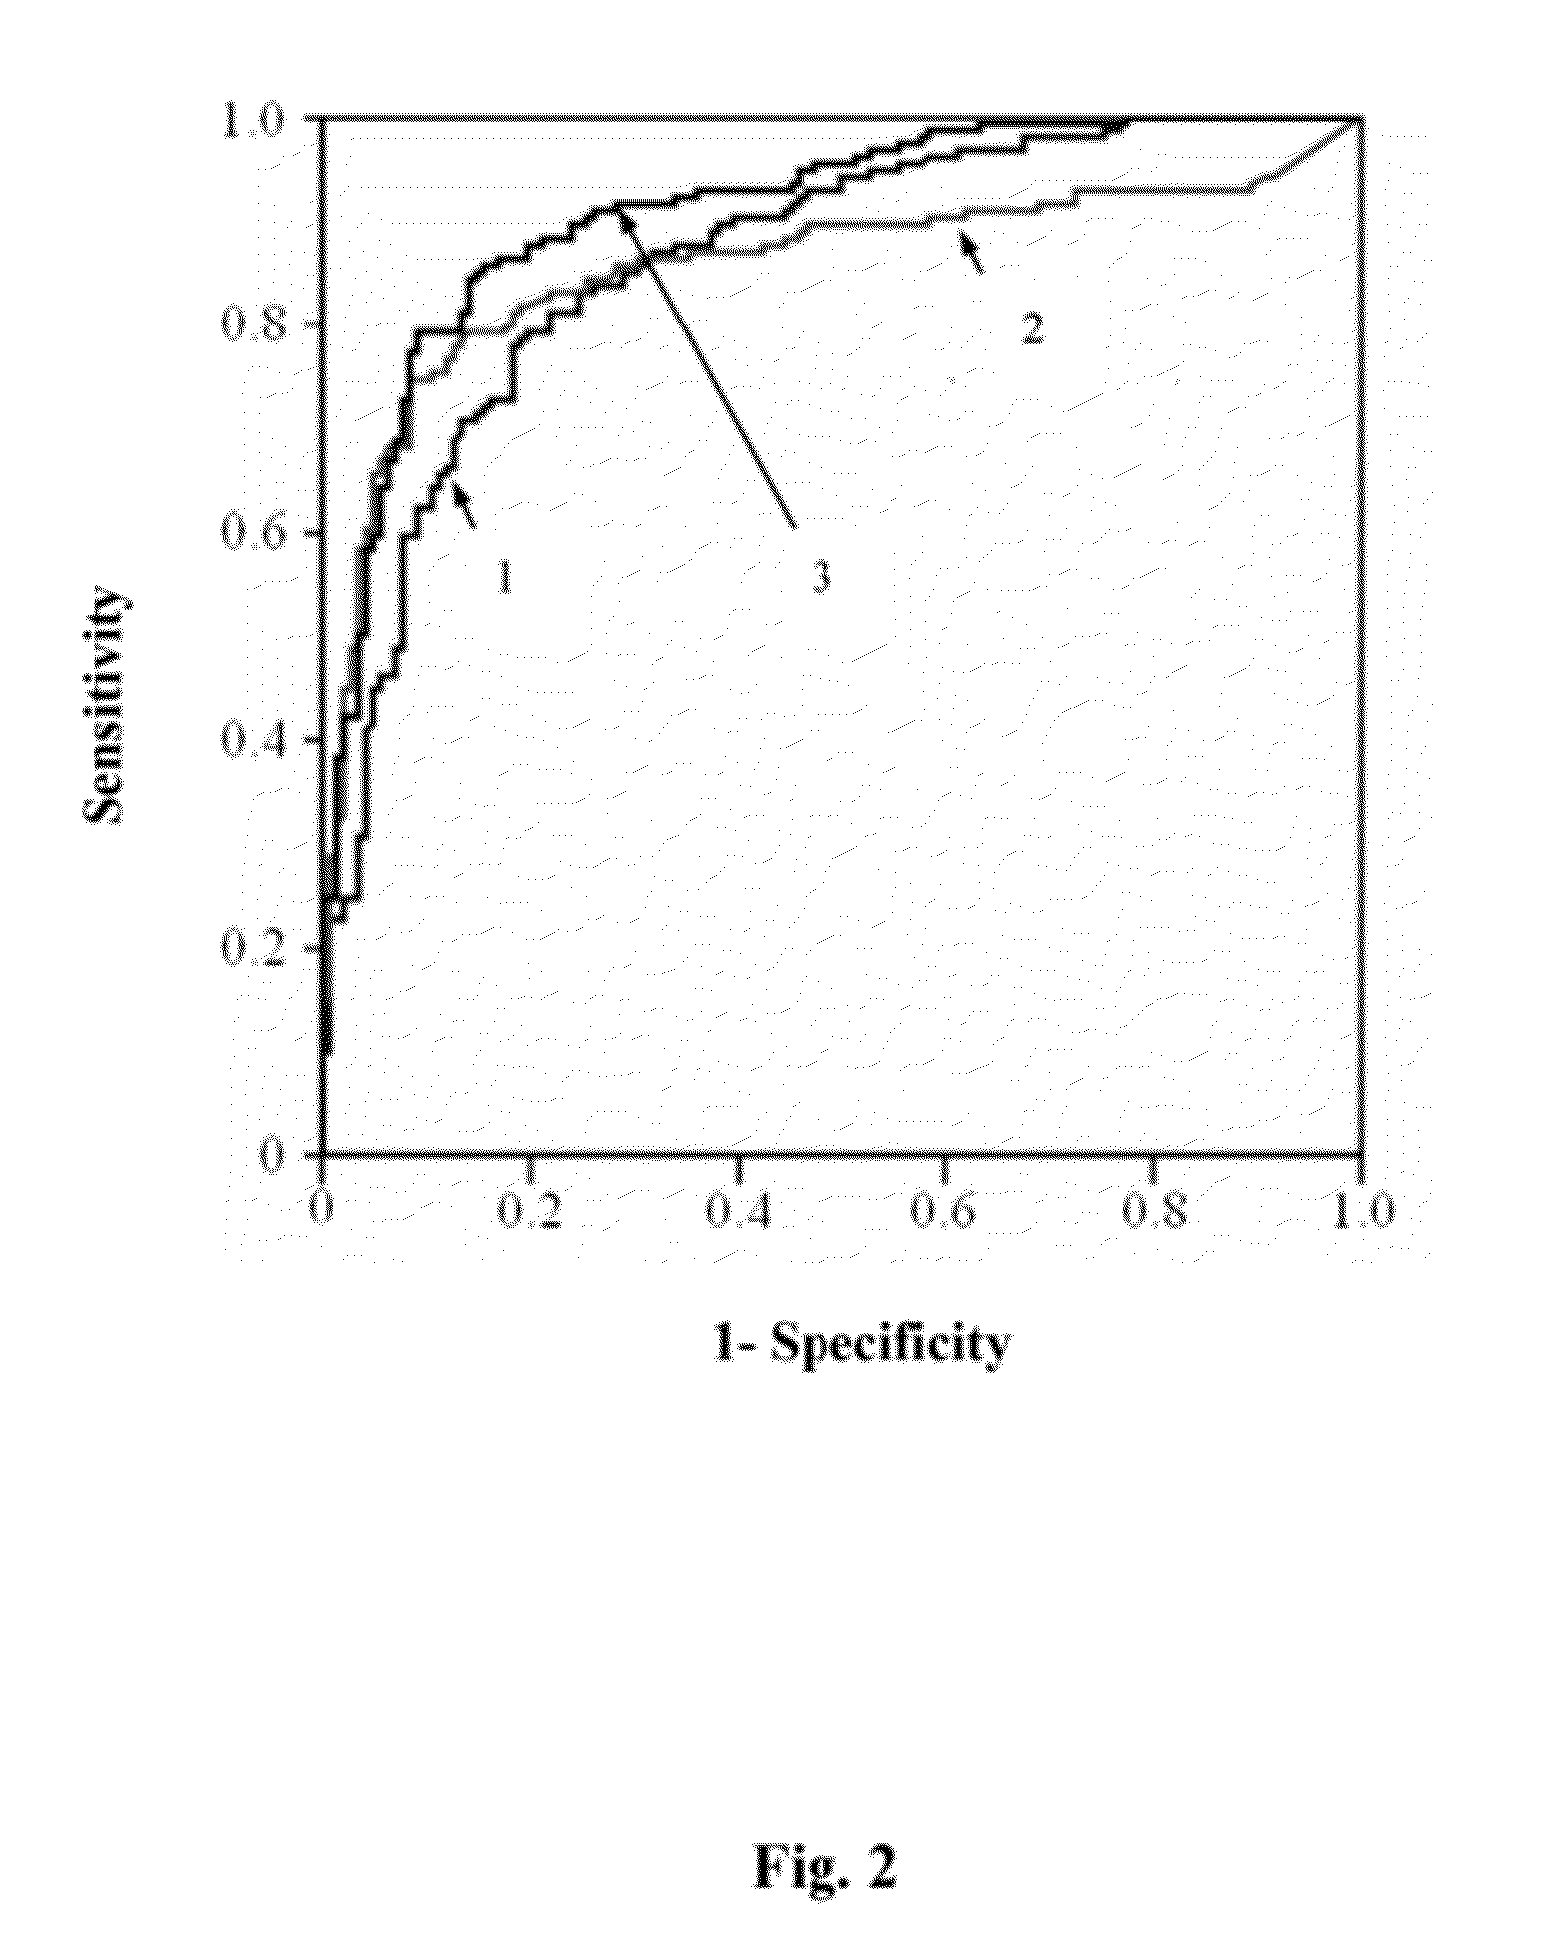 Serological marker for detecting pancreatic cancer and a method for using the serological marker